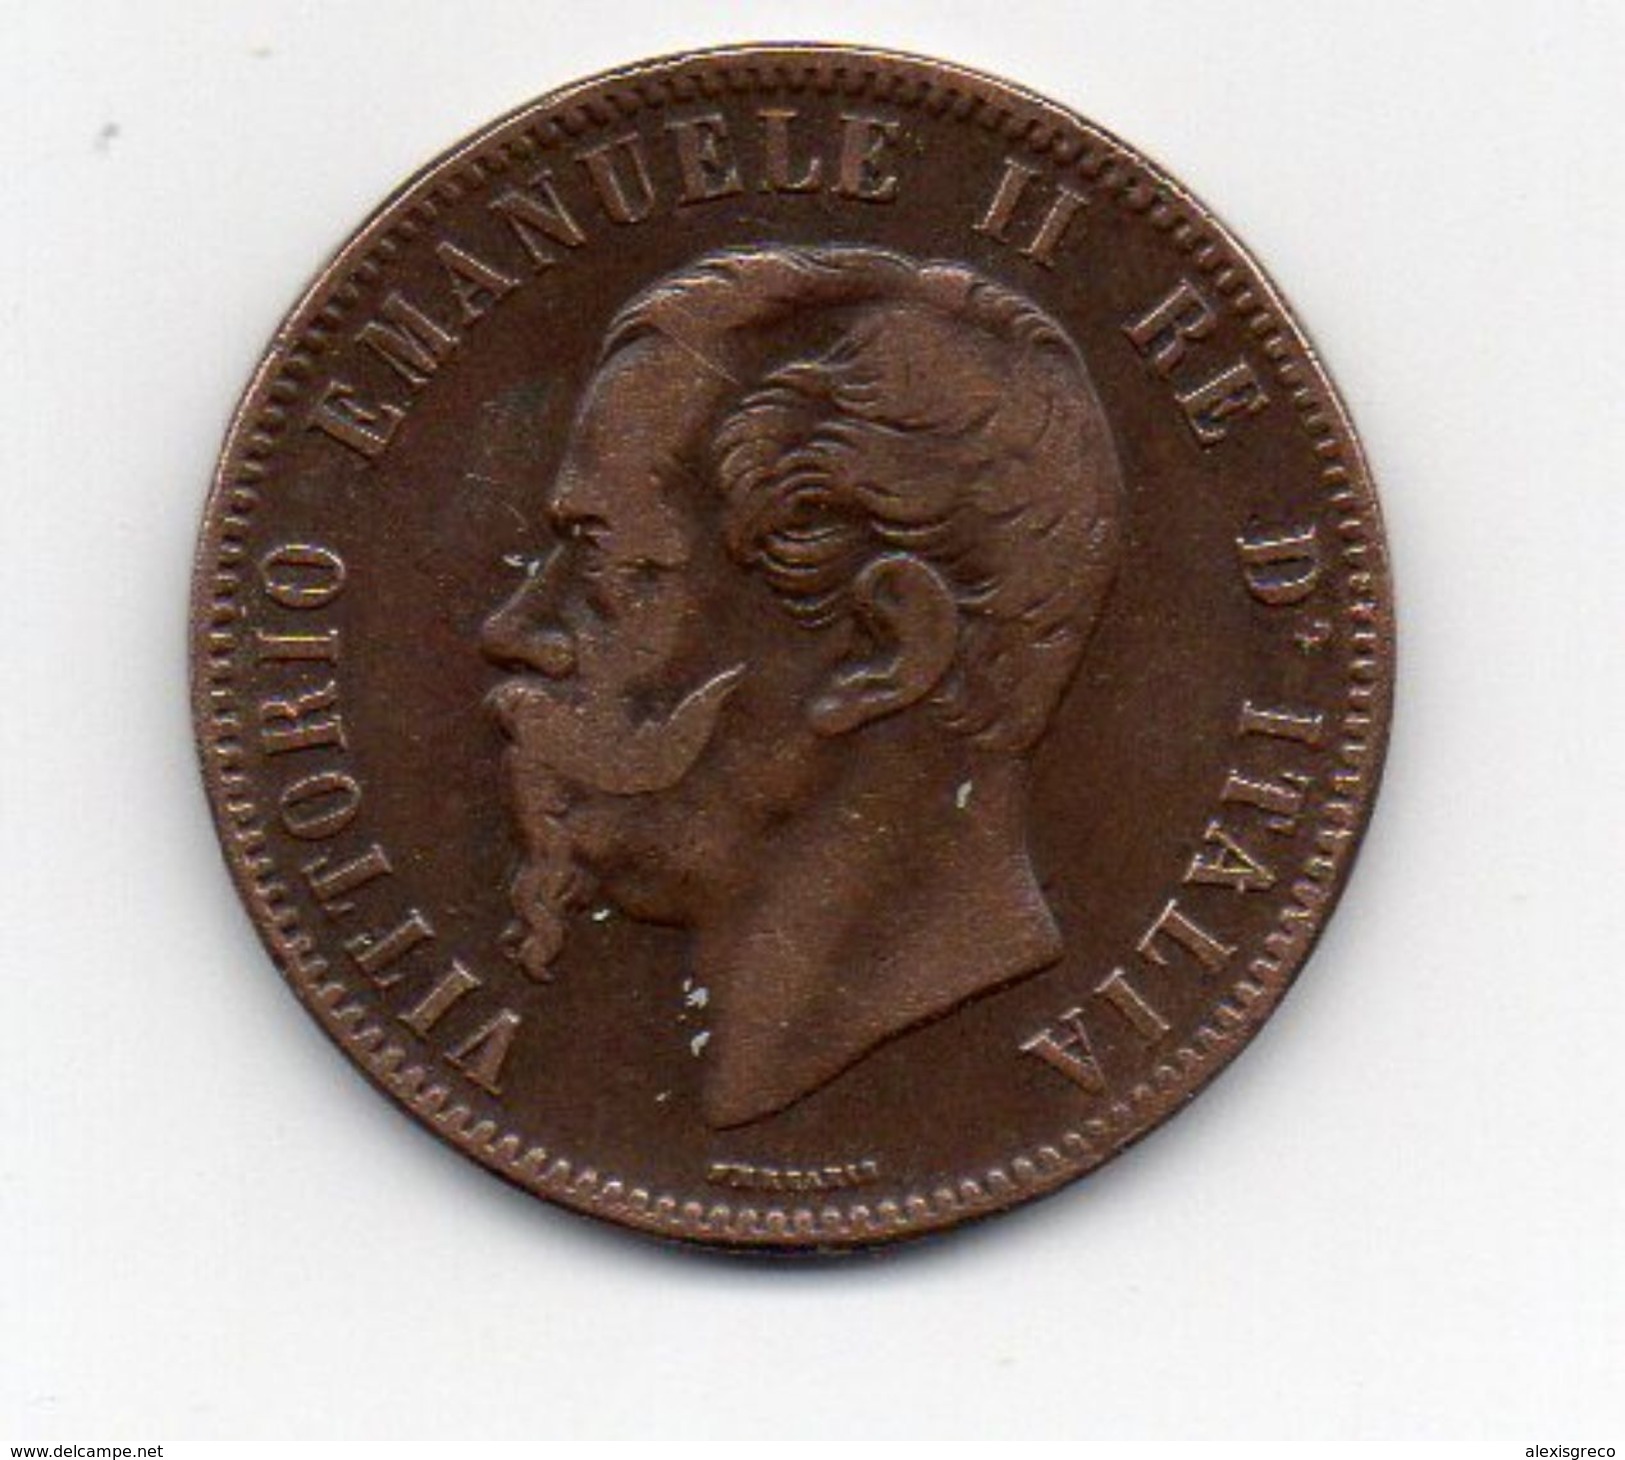 ITALY 1863 TEN CENTESIMI COPPER COIN NO MINT MARK USED In FAIR CONDITION. (HG96) - 1861-1878 : Victor Emmanuel II